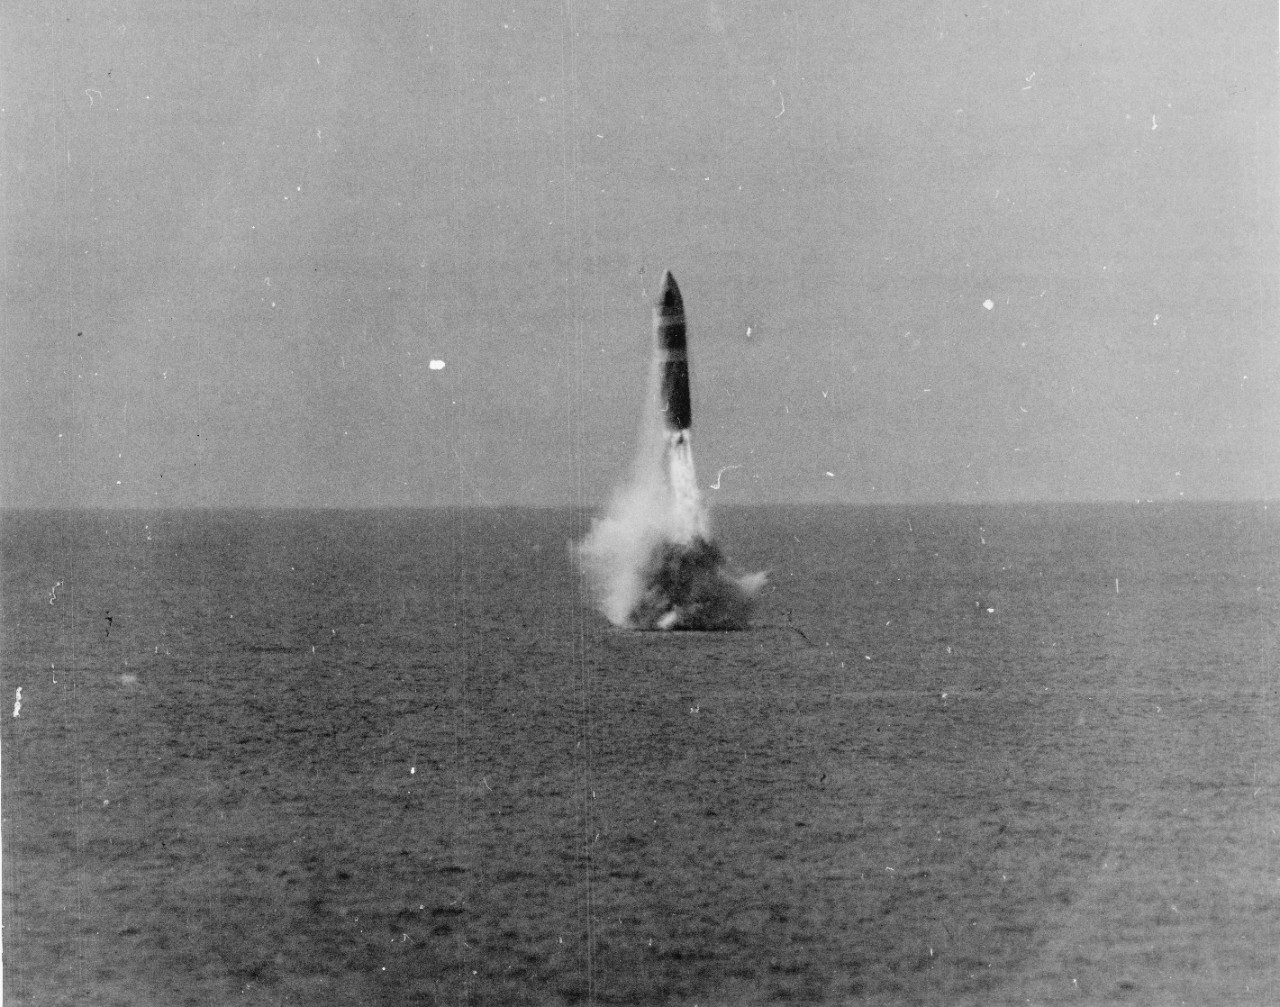 <p>L55-15.04.20 Launch of Poseidon Missile from USS James Madison (SSBN-627)</p>
